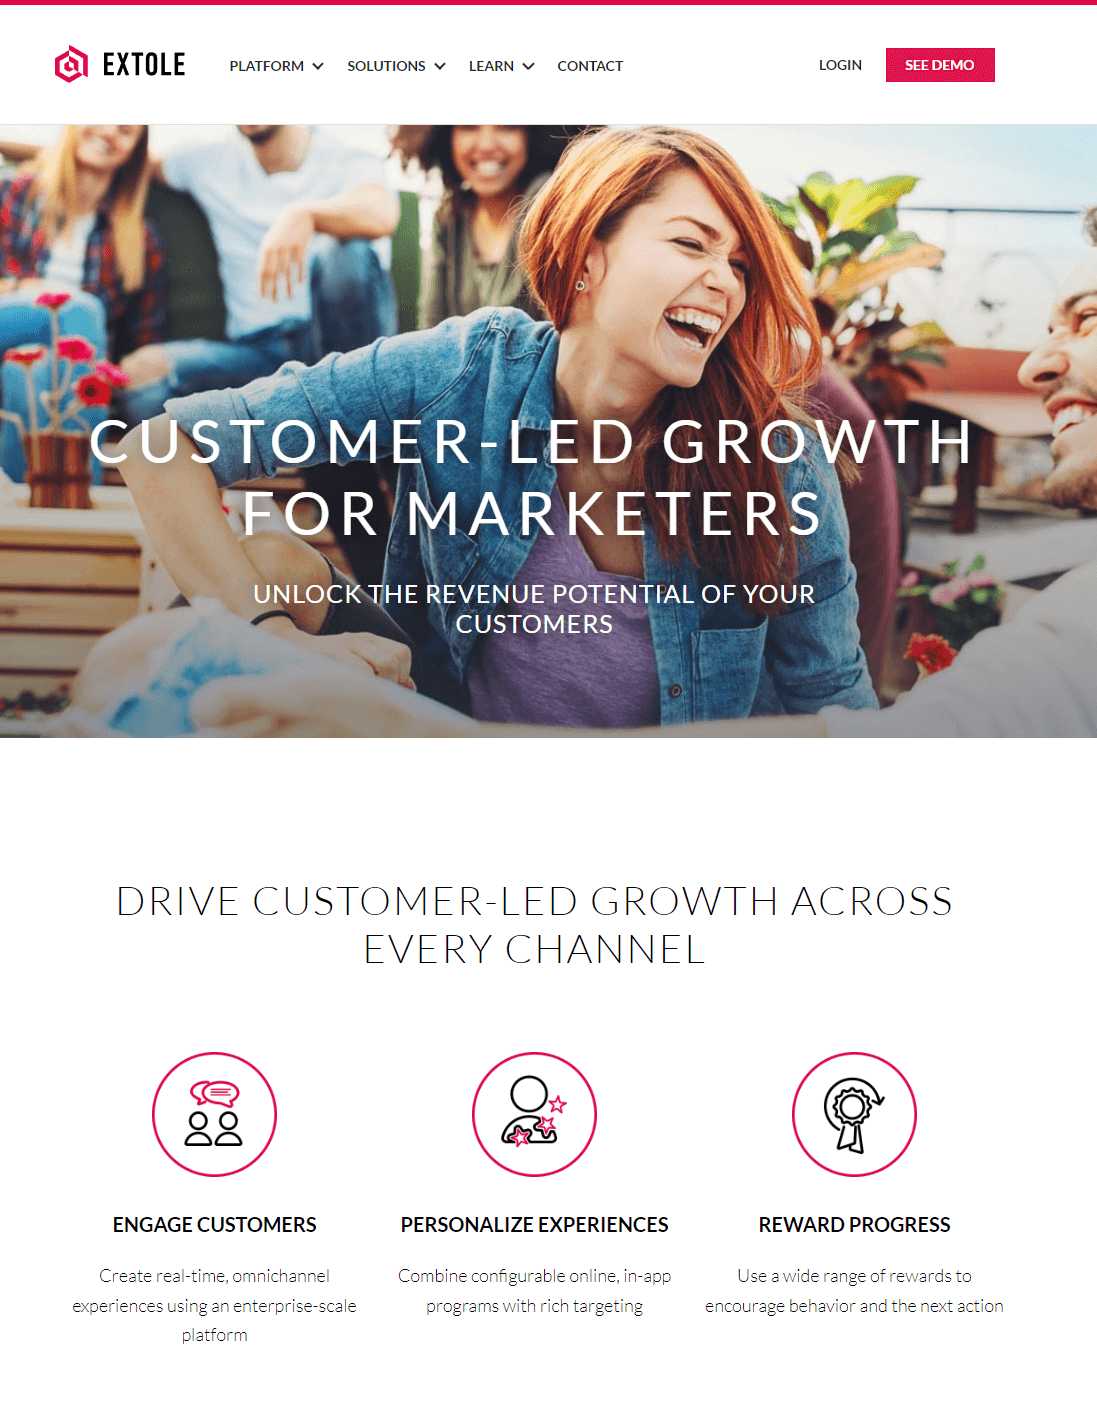 Extole website: Customer-led growth for marketers